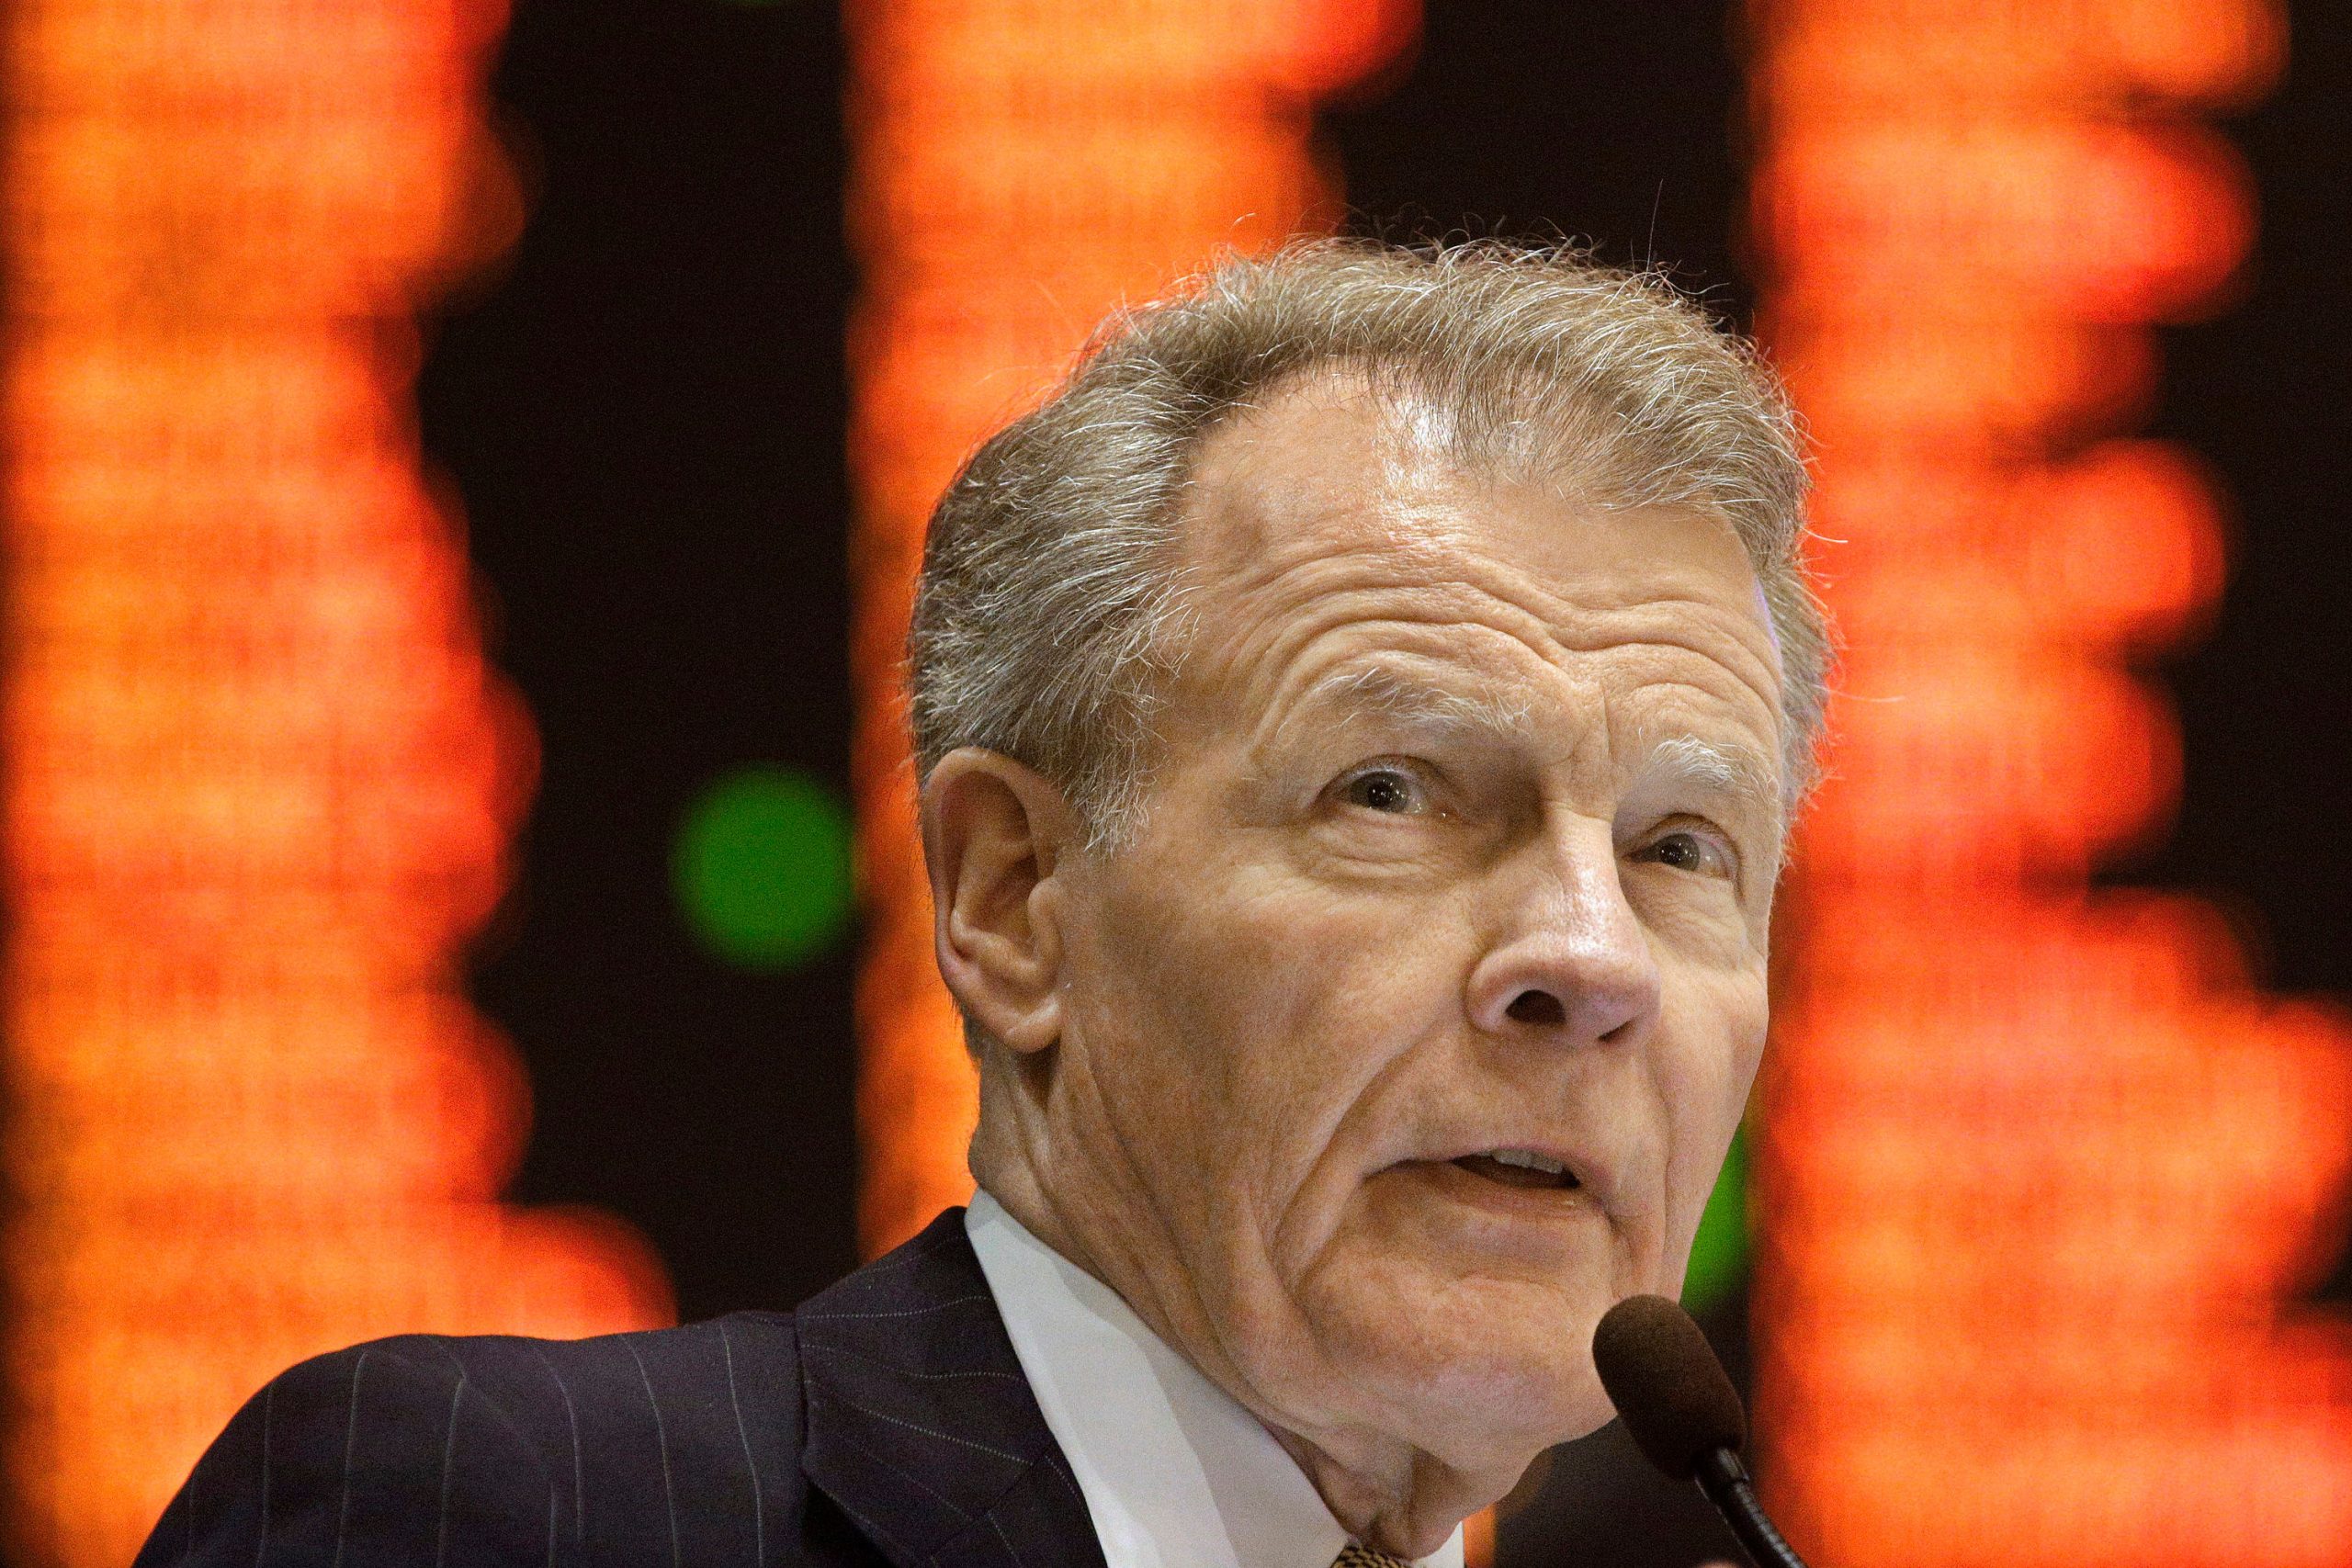 Michael Madigan’s net worth, party, wife, children, and other details